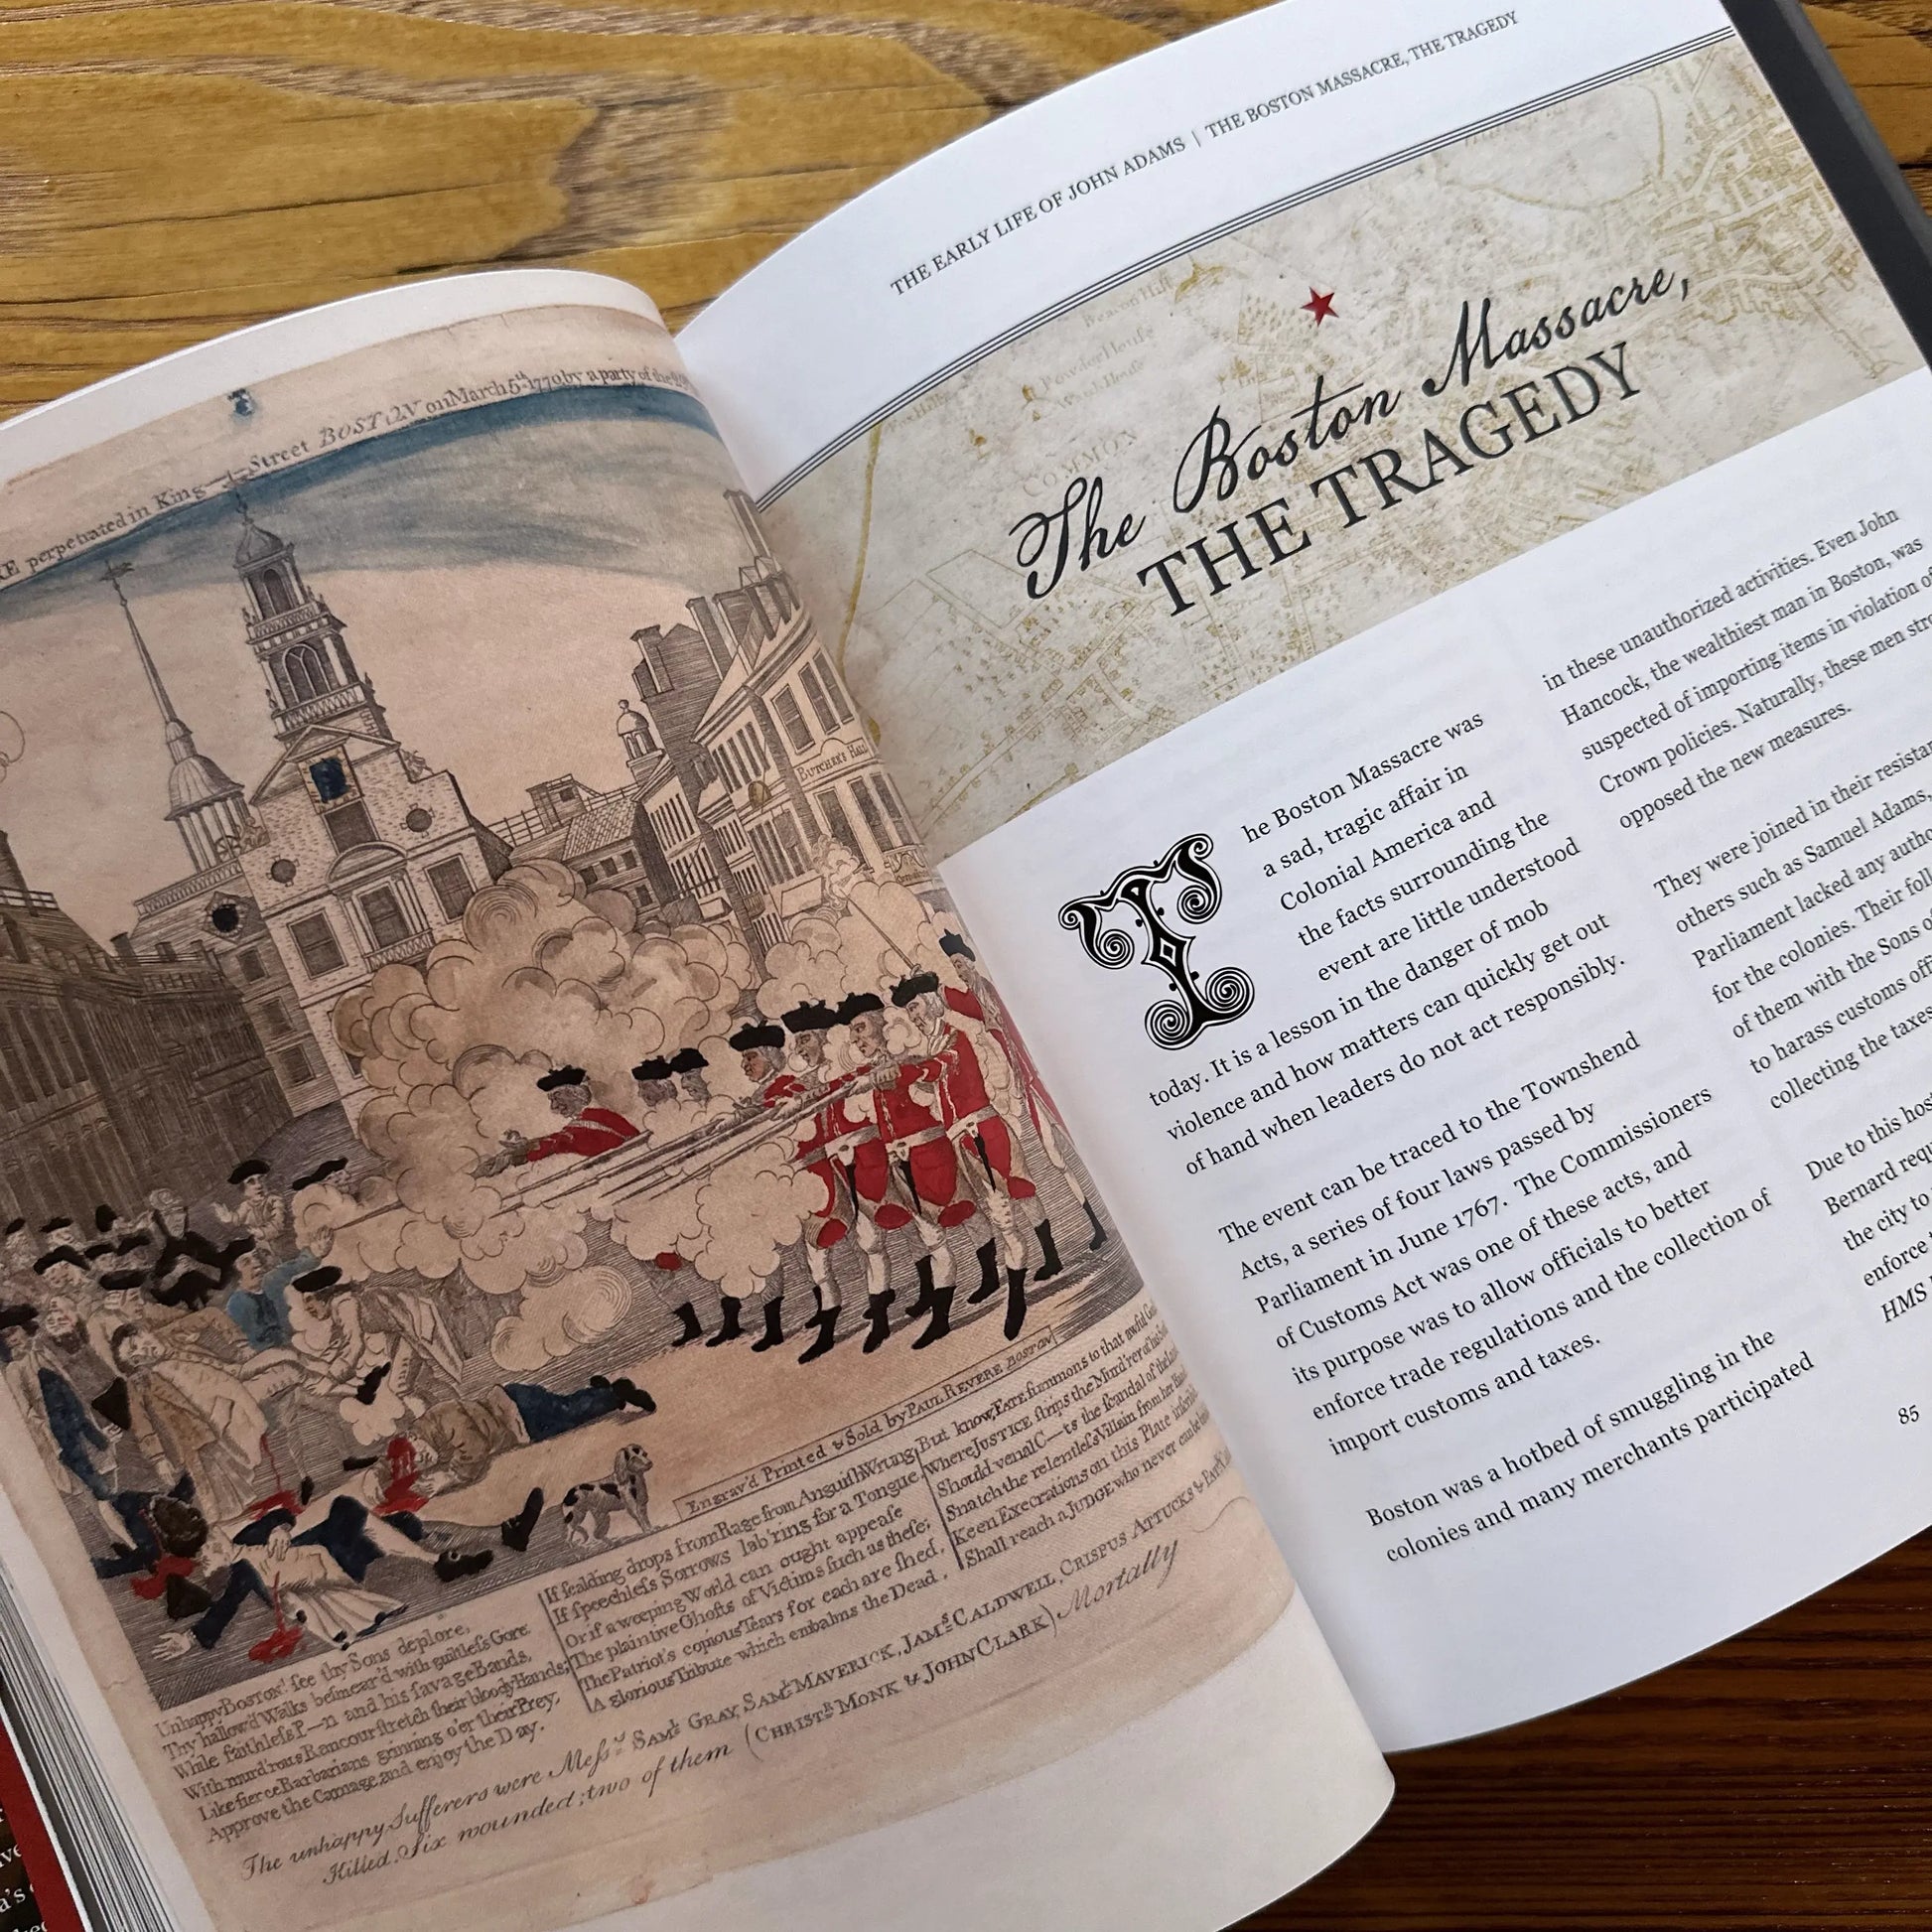 The Boston Massacre from "An American Triumph: America’s Founding Era through the Lives of Ben Franklin, George Washington, and John Adams" - Signed by the author Tom Hand from The History List store